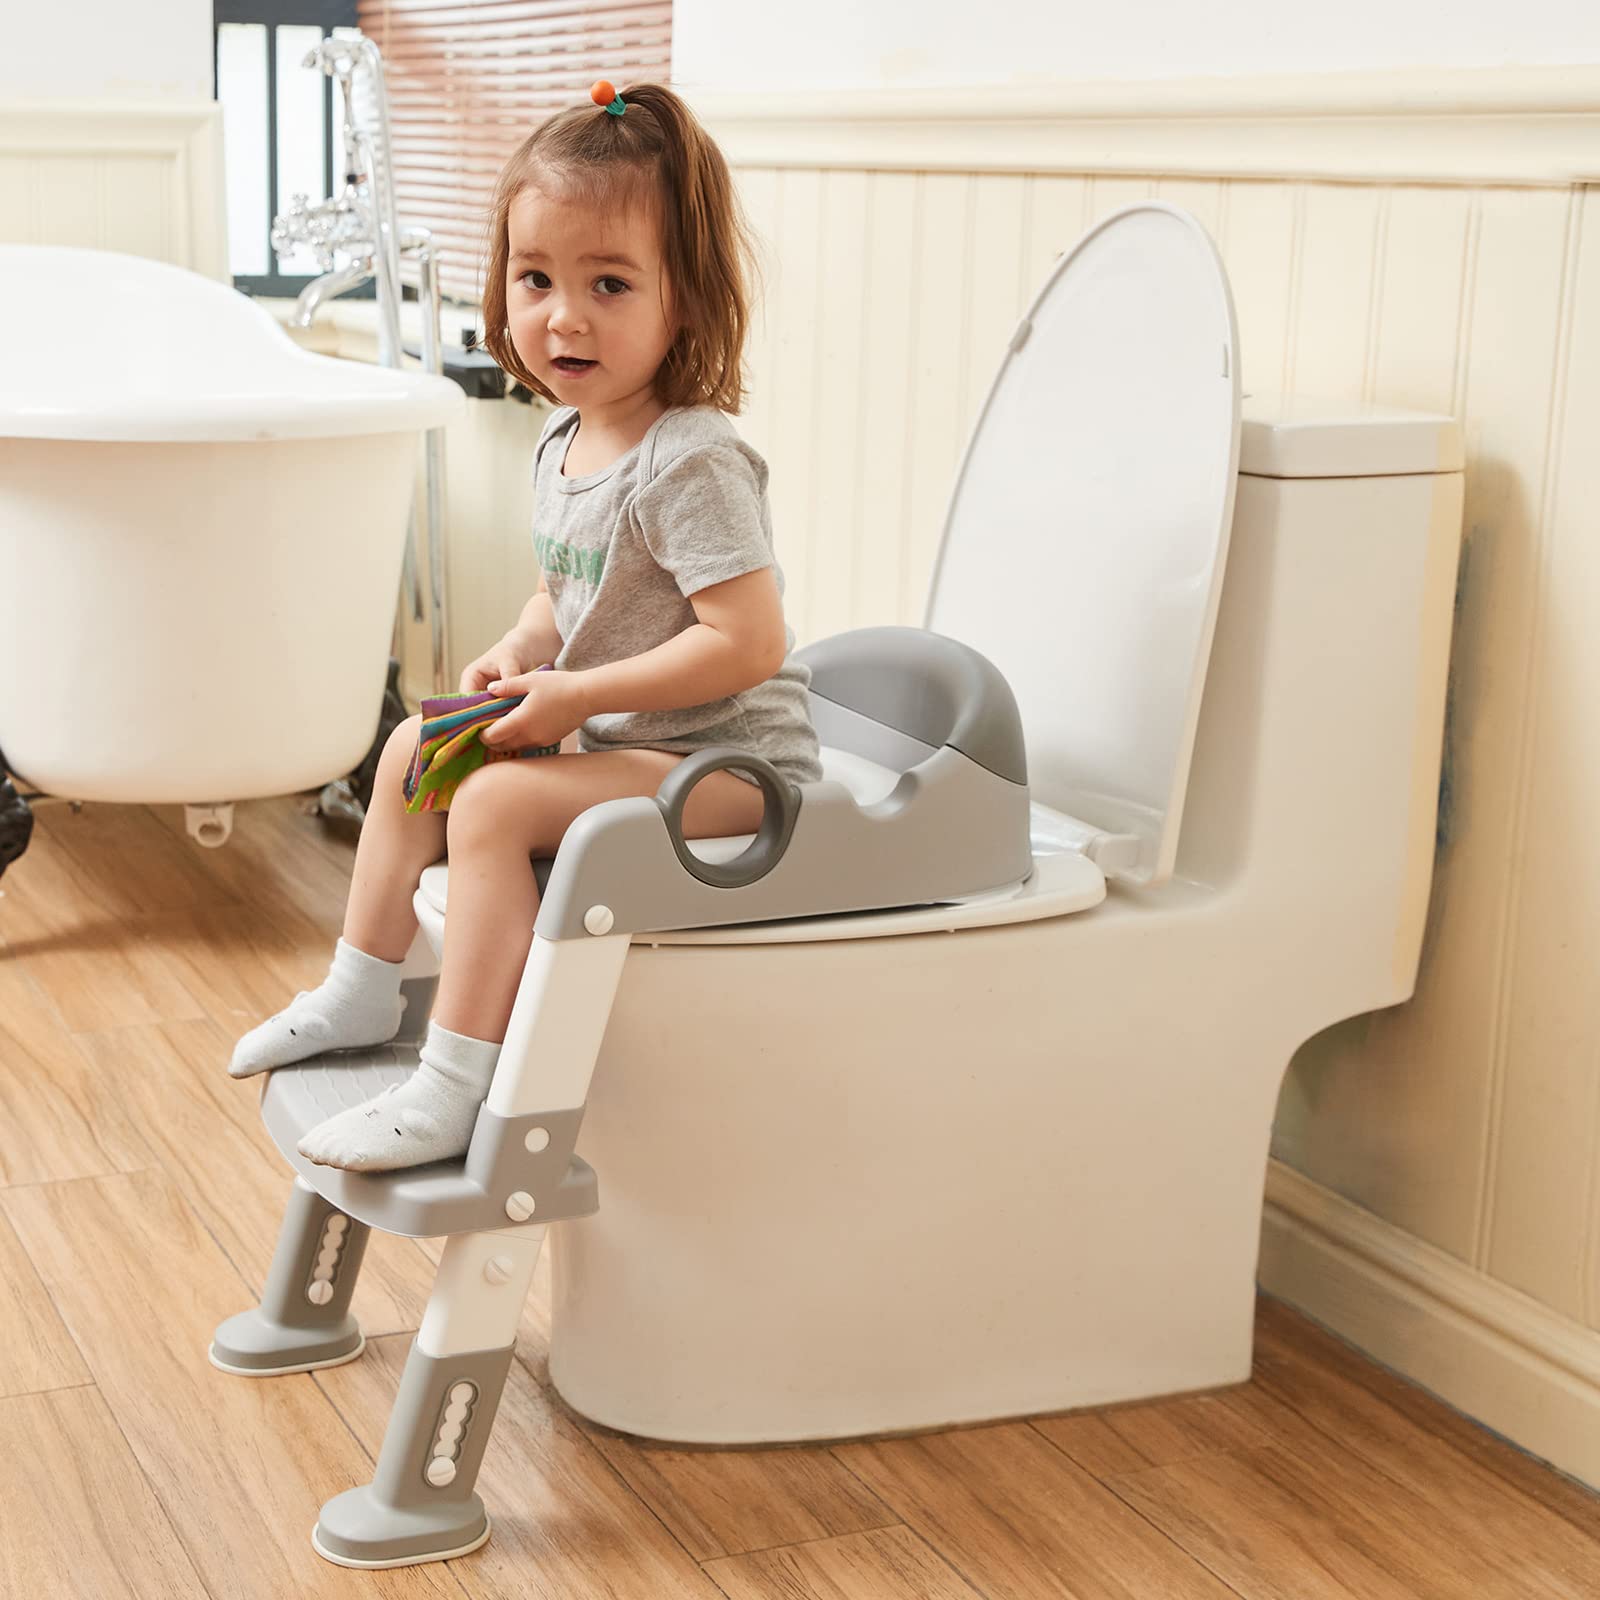 toilet steps for babies Baby toddler potty training toilet ladder seat steps. this easy-to-use